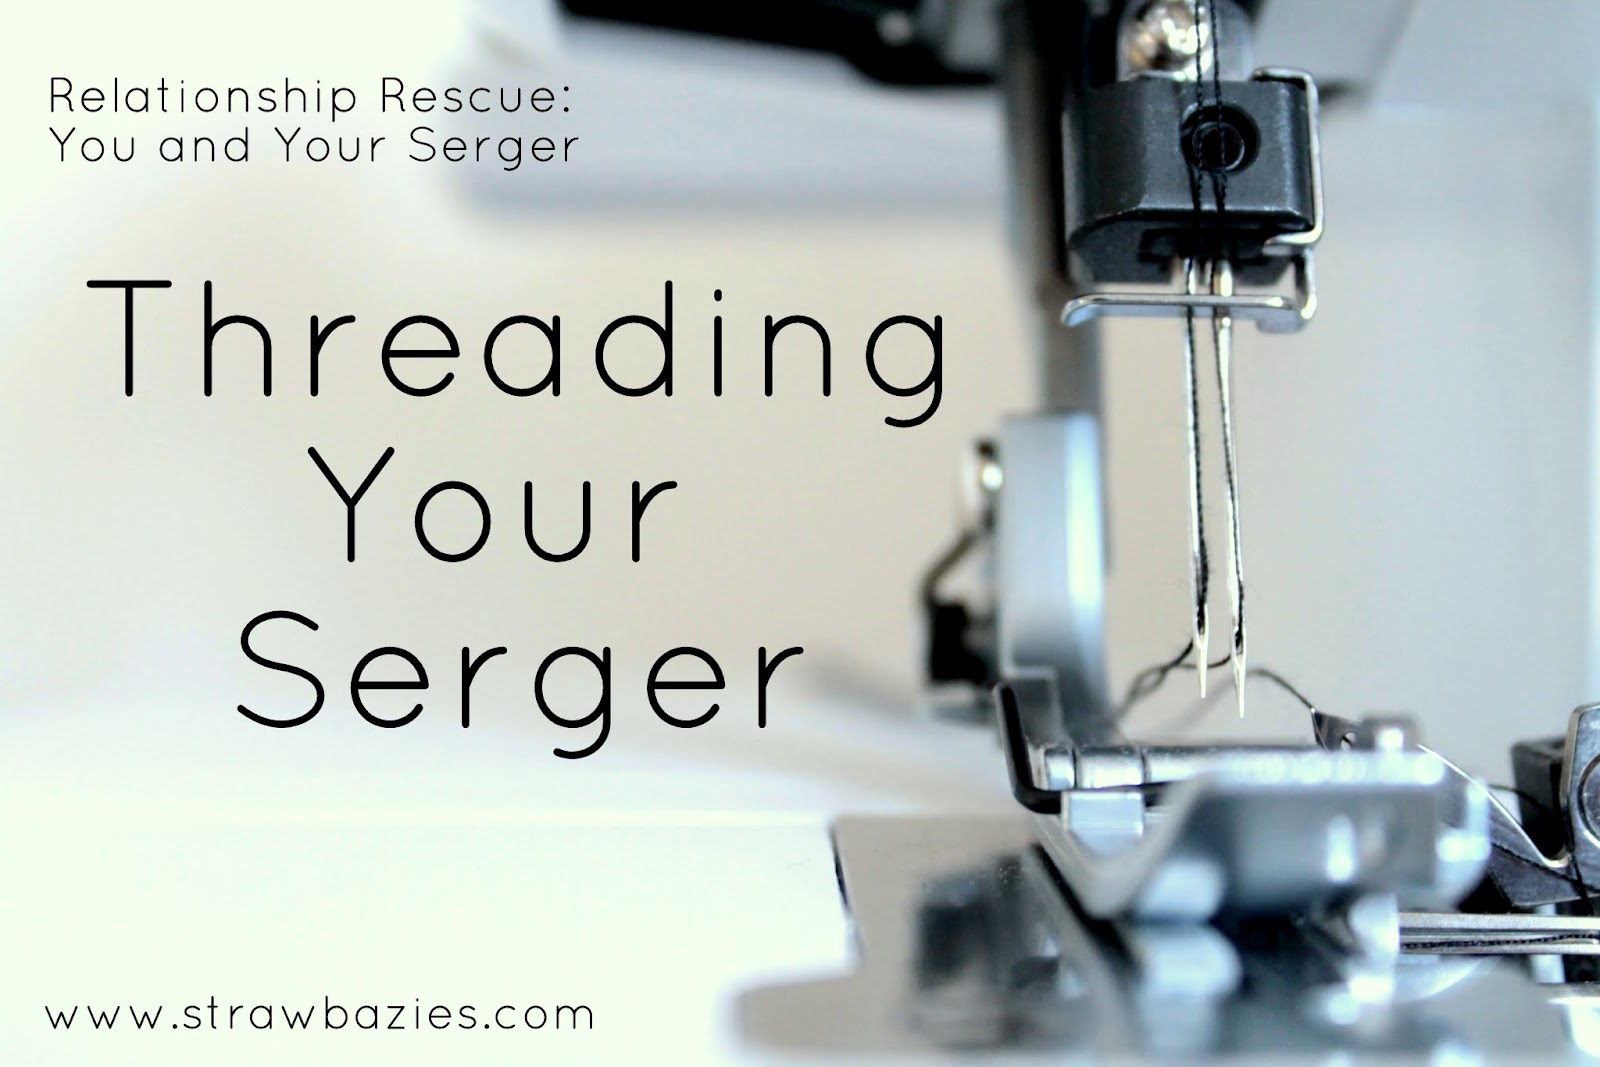 How to divide serger thread into smaller spools - a silly kind of tutorial